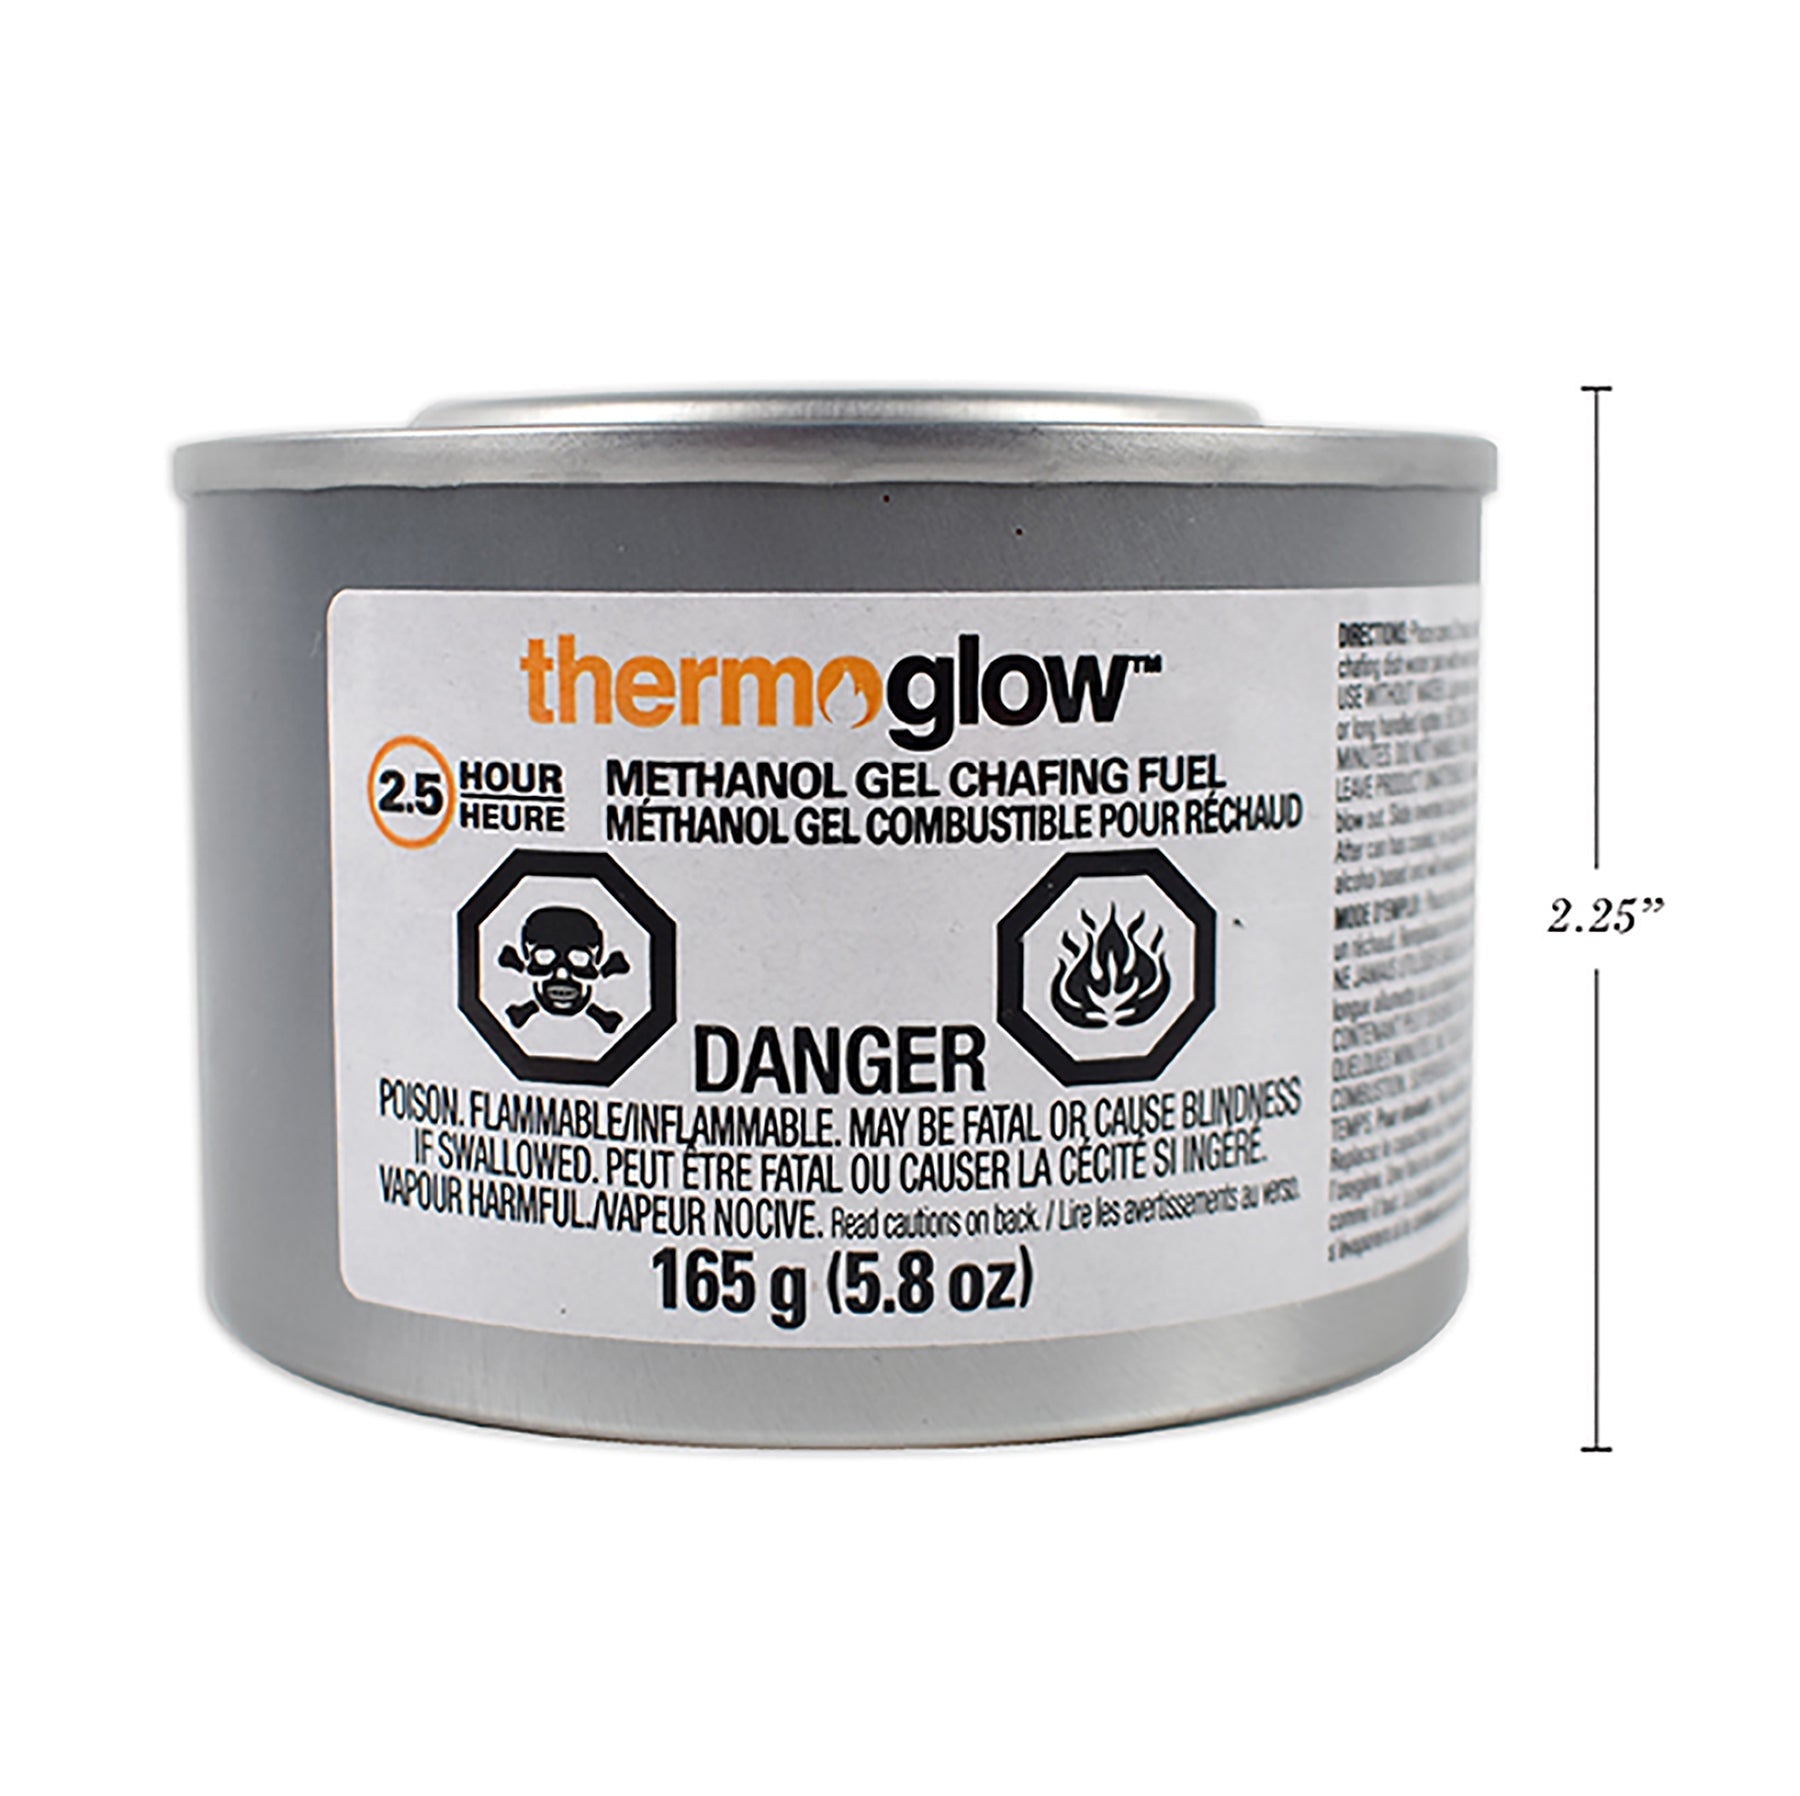 BBQ Thermo Glow 2.5 Hour Methanol Gel Chafing Fuel